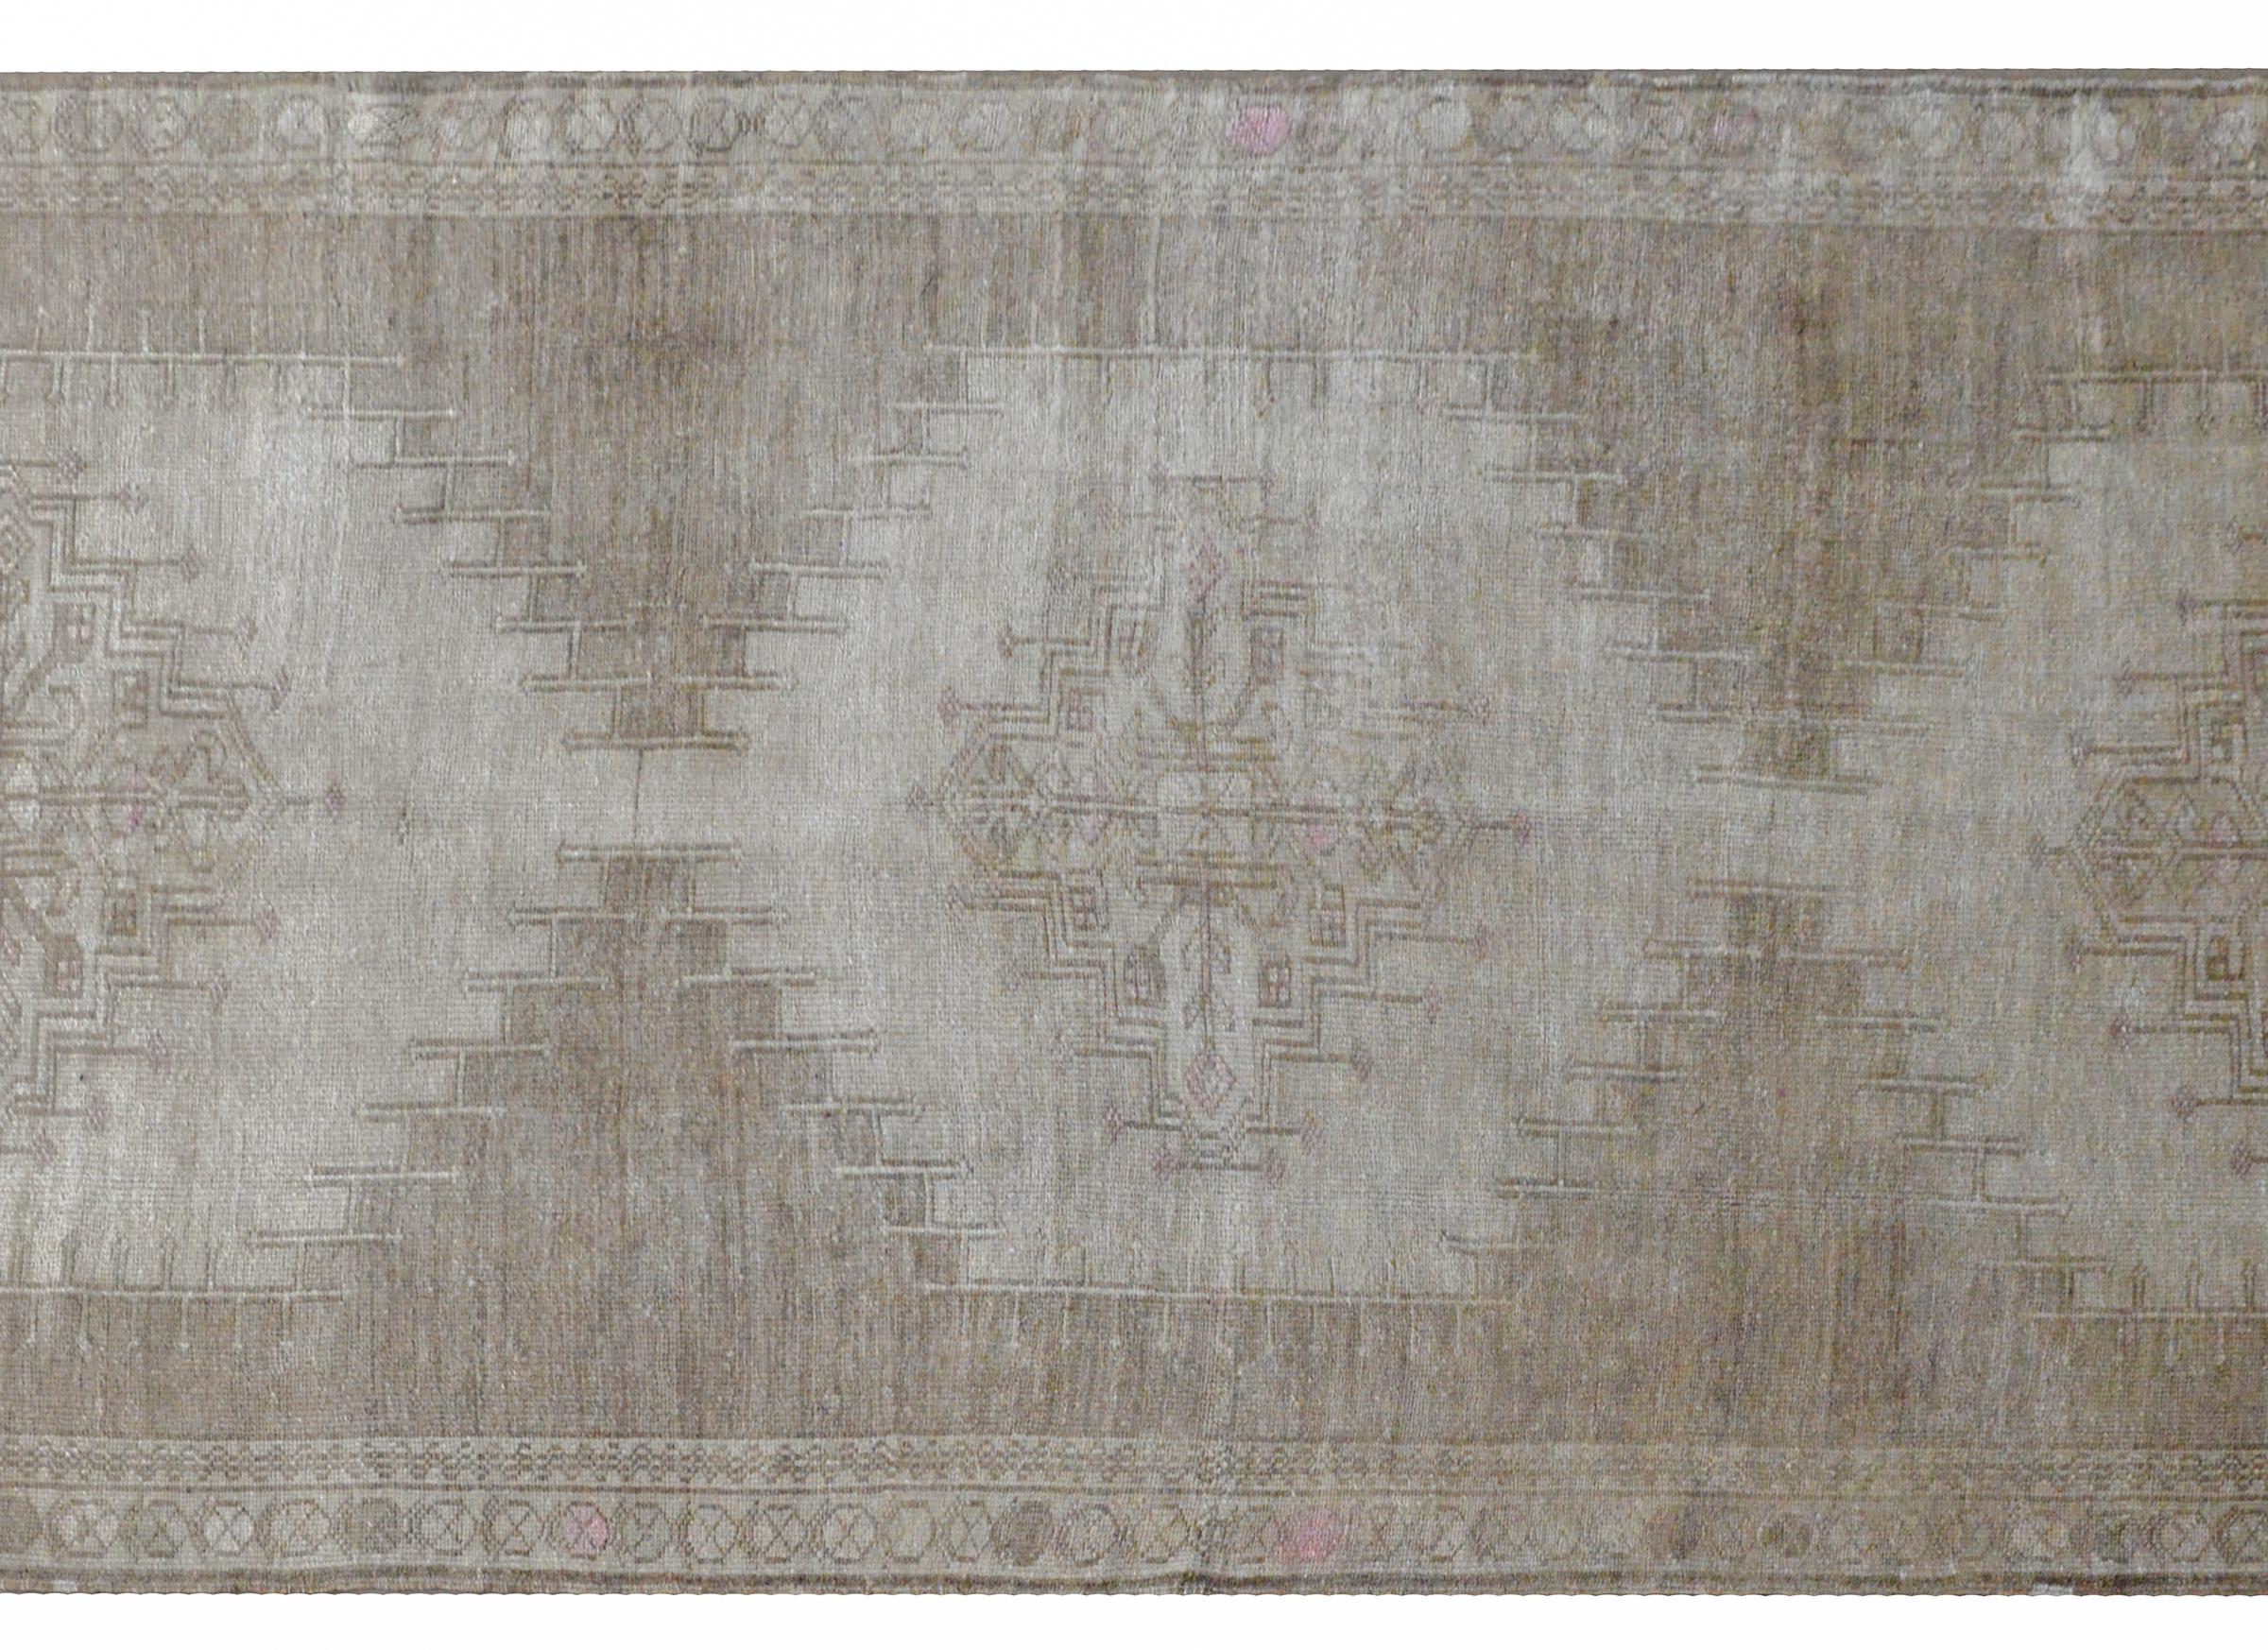 A wonderful vintage hand knotted Turkish Oushak runner with three large medallions woven with stylized floral and vine patterns against a solid cream field, and surrounded by a pattern of stylized flowers. This rug has been given an antiqued wash to